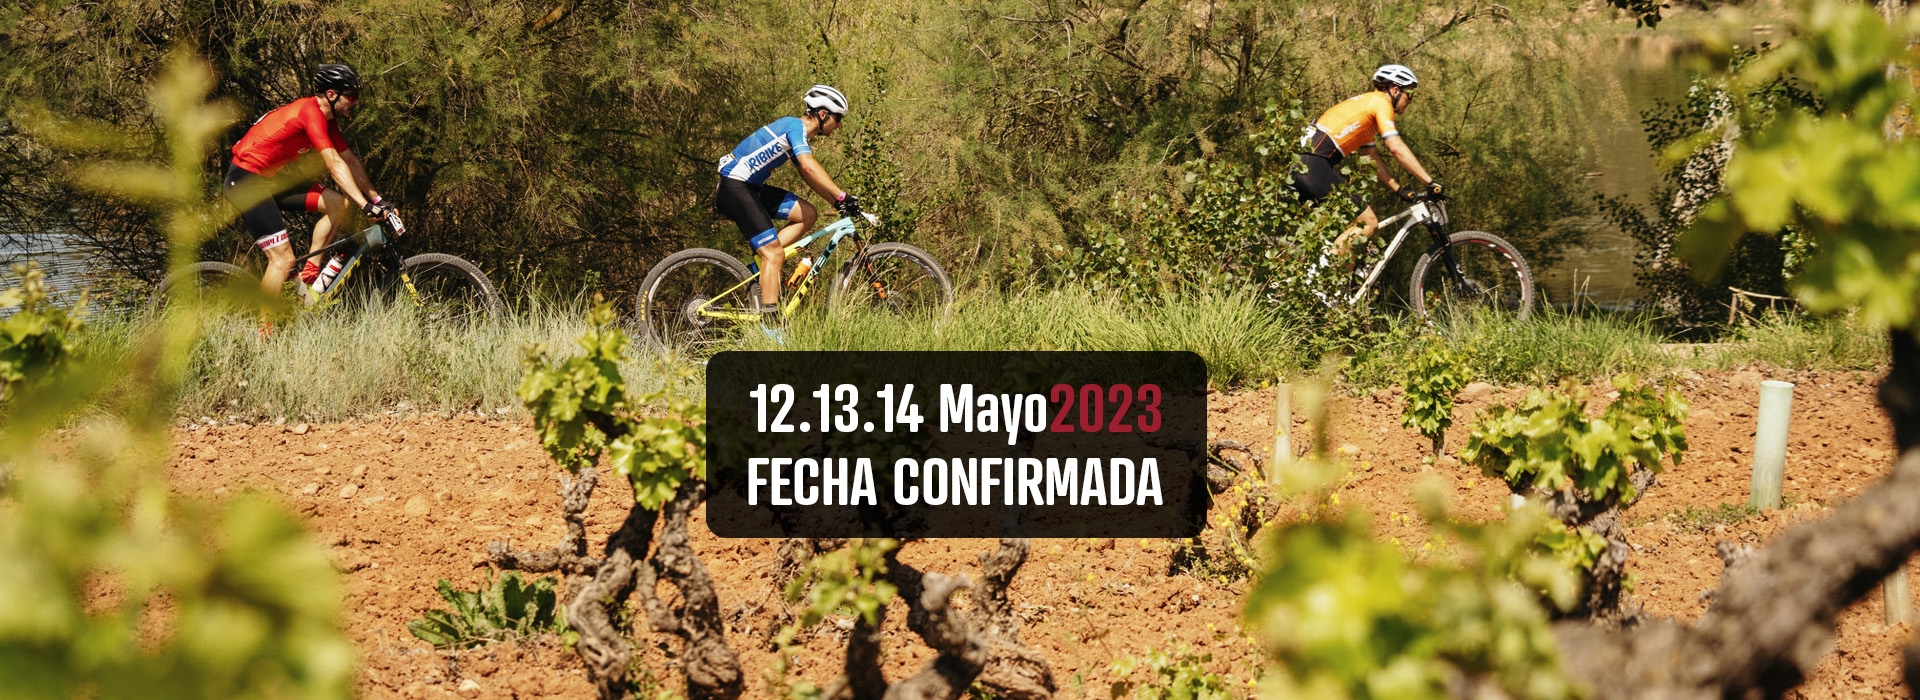 The 9th edition of the La Rioja Bike Race presented by Pirelli maintains its usual dates